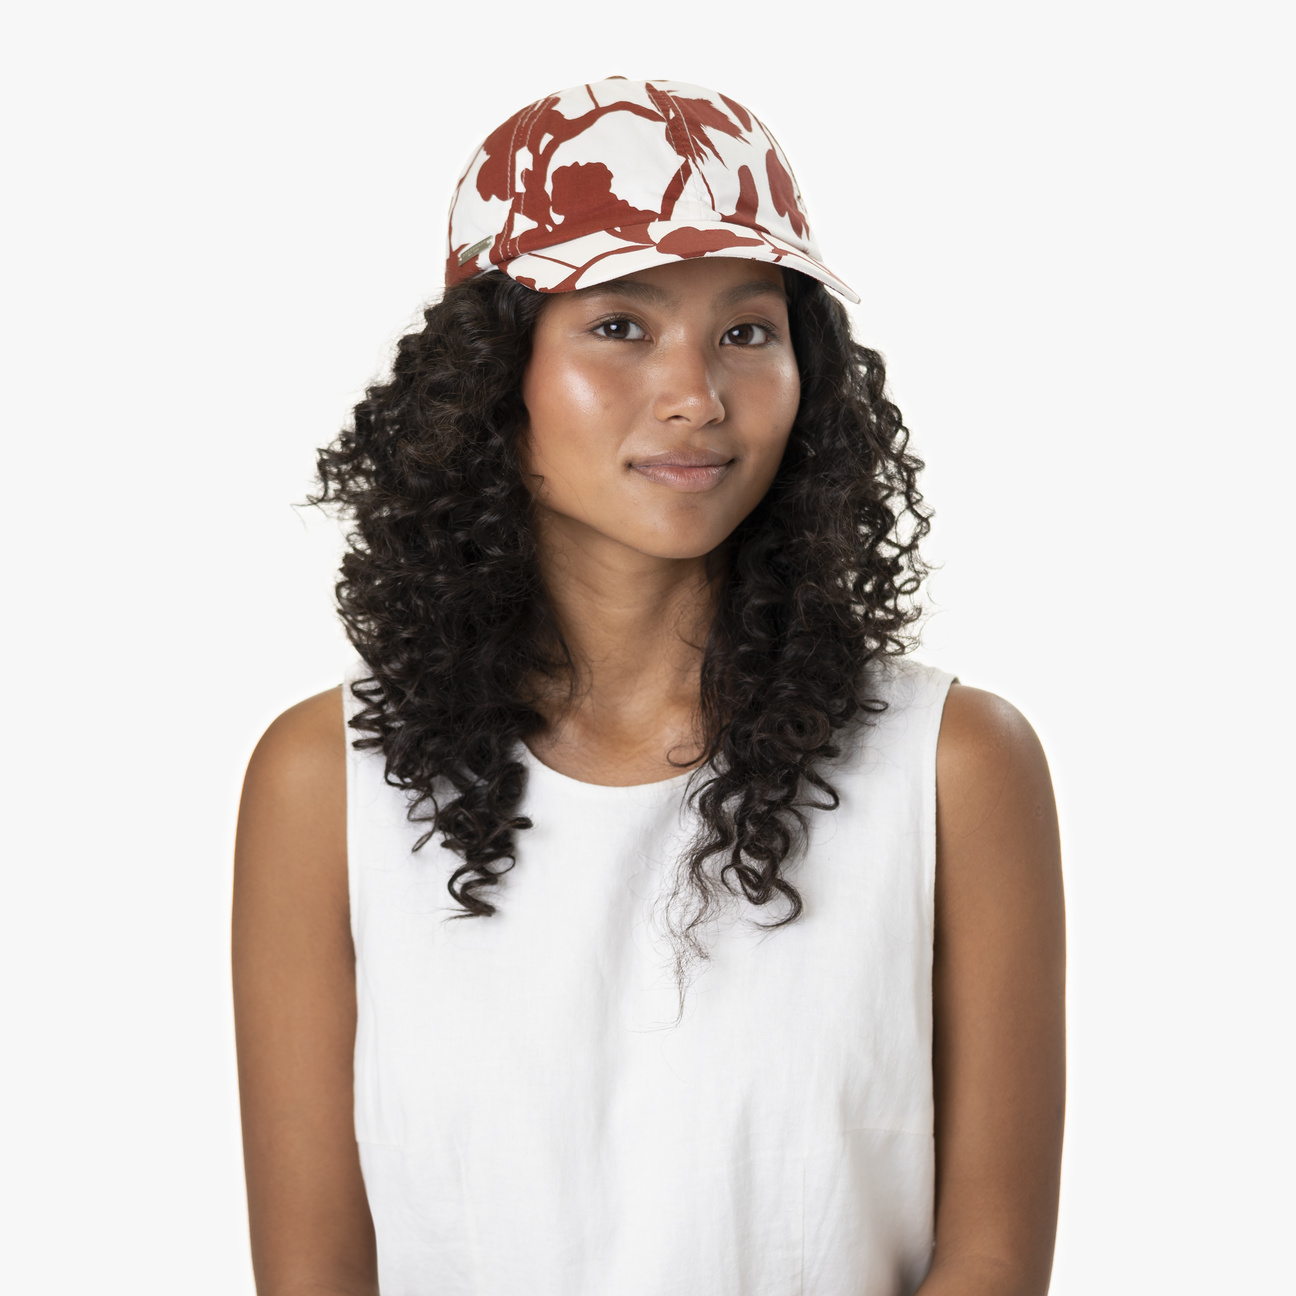 Twotone Flower Cap by Seeberger - 29,95 €